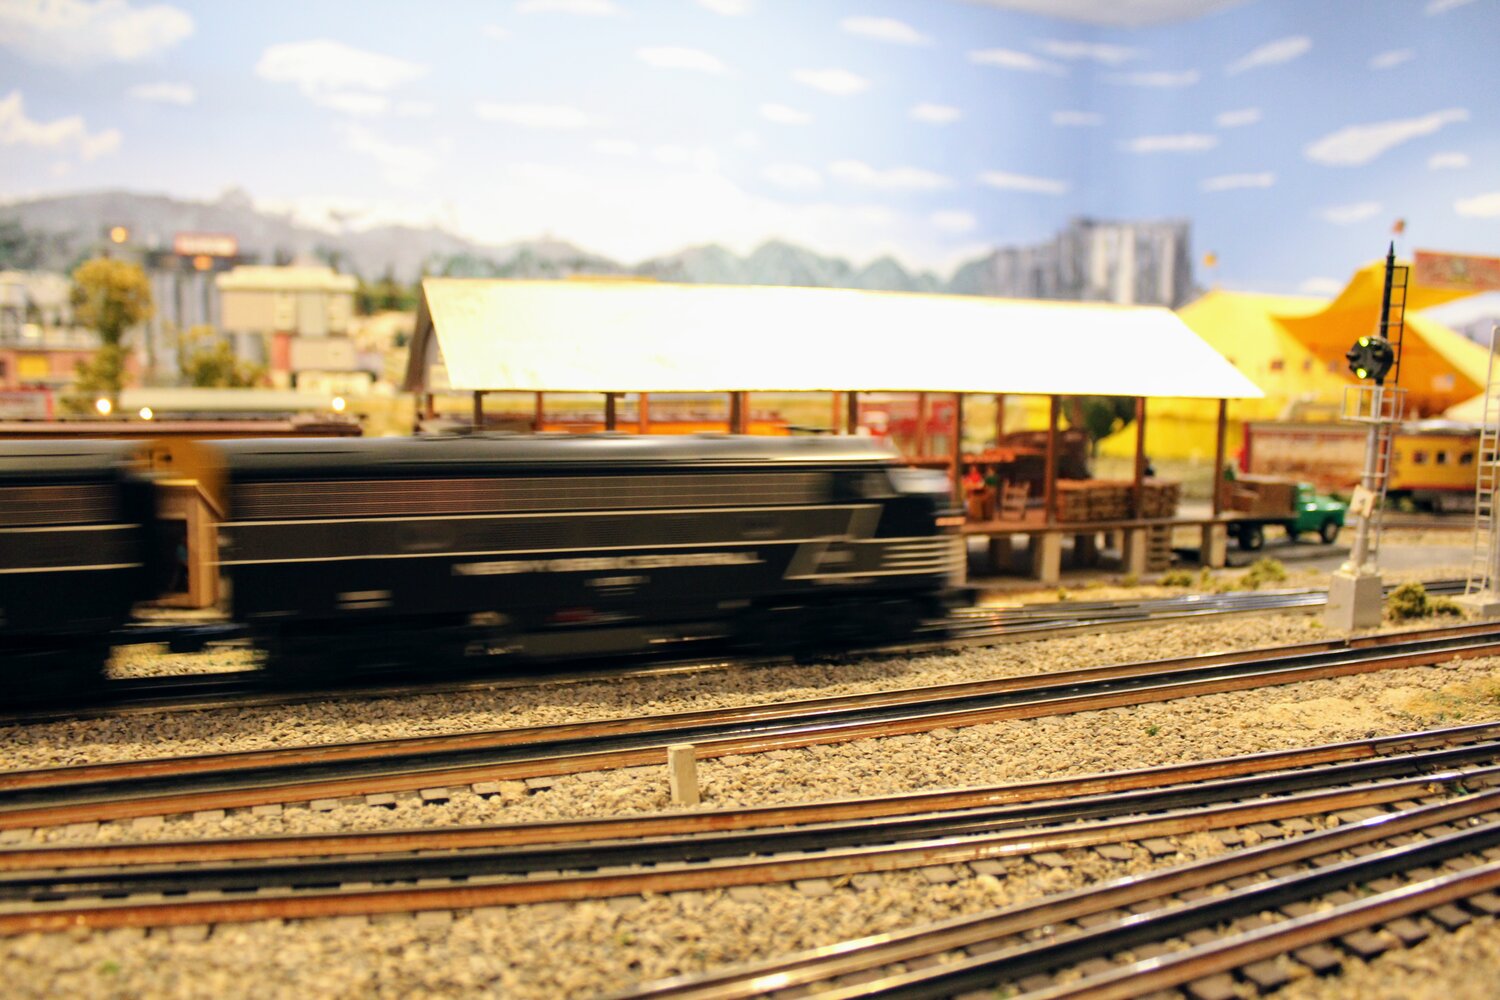 The train blasts past the L. Irwin & Sons Southland Potatoes’ shed.